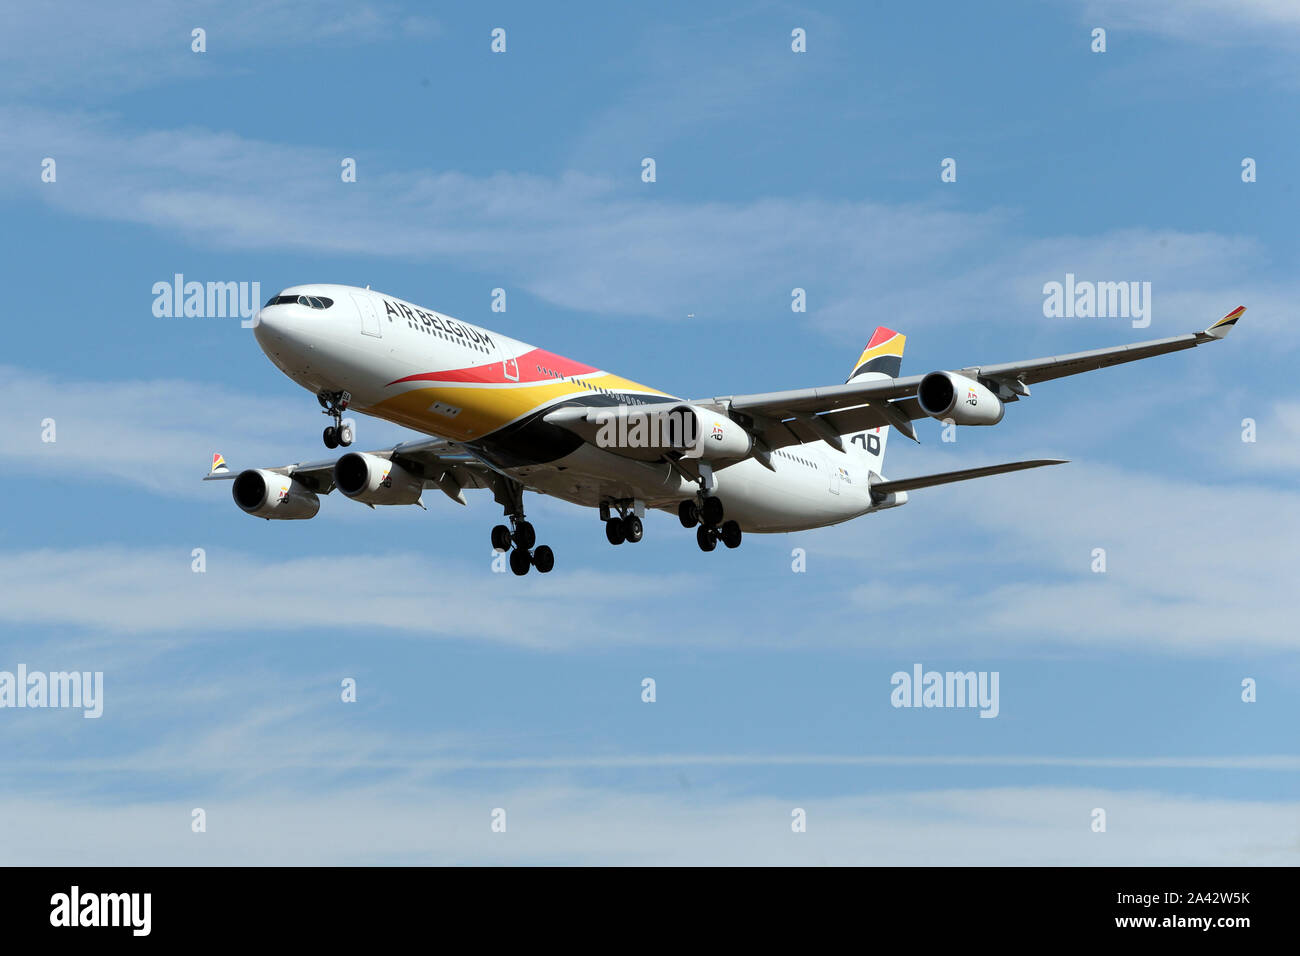 Airbus A340-313 Air Belgium Coming into London Heathrow Airport in the United Kingdom 00-ABA Stock Photo